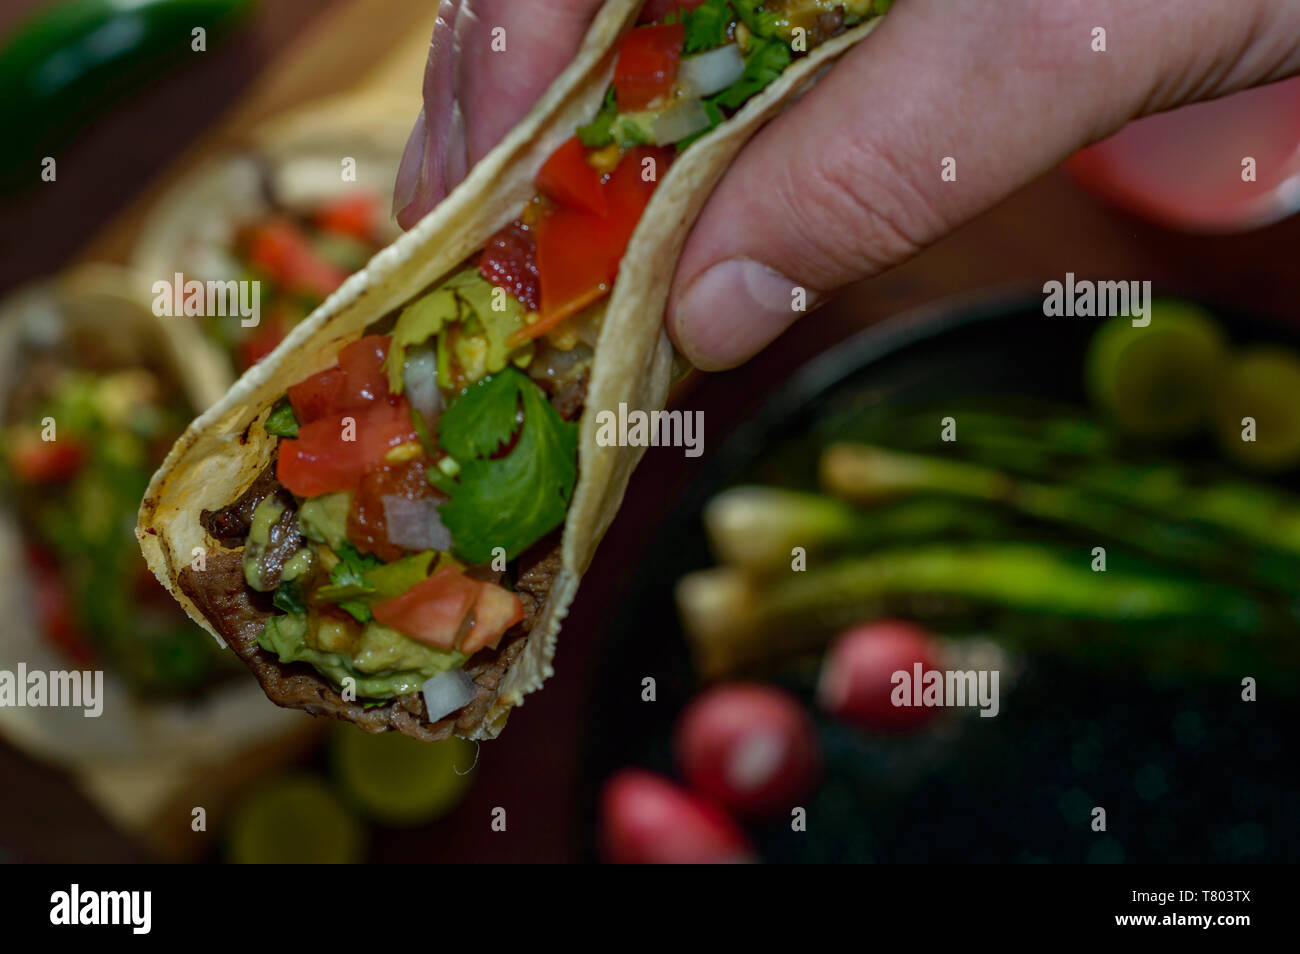 Tijuana tacos, lifting grilled carne asada with radishes, limes, spring onions, low key with copy space Stock Photo